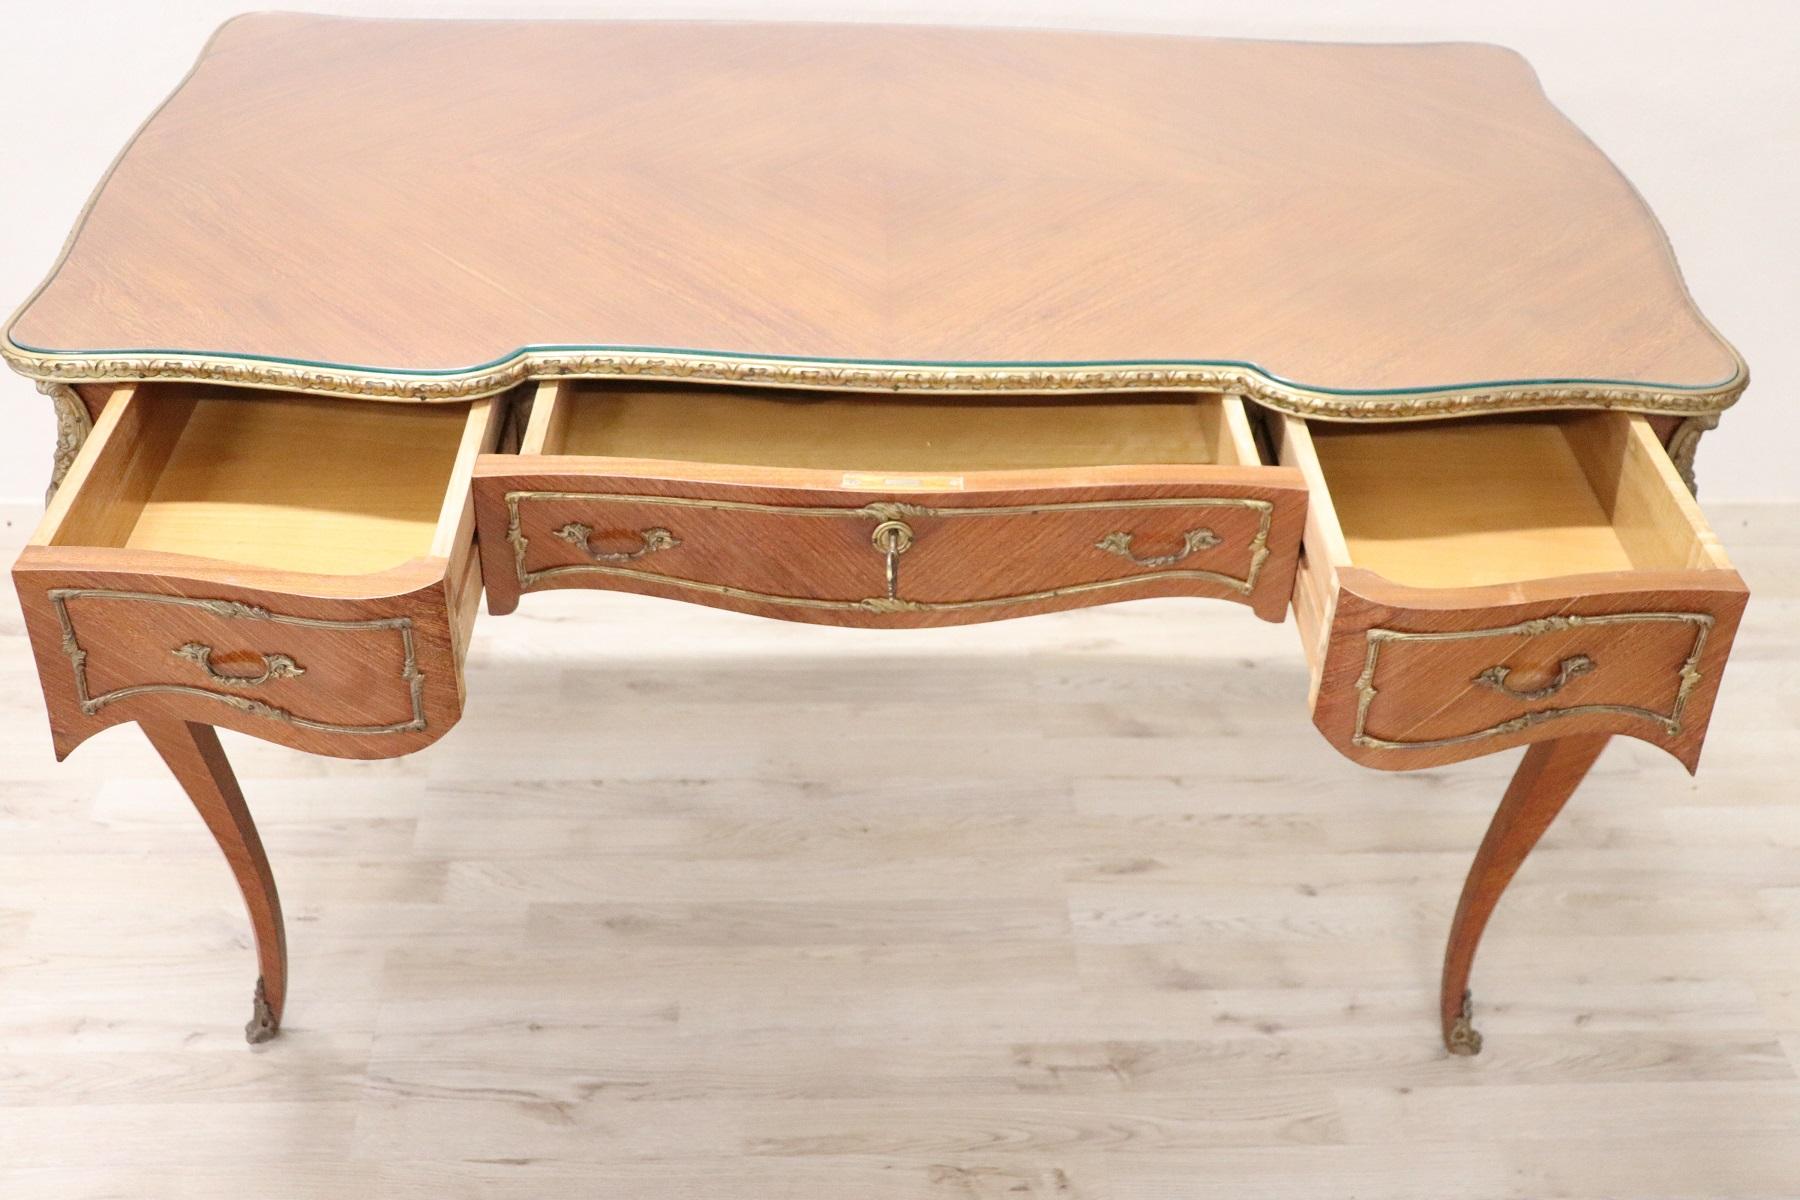 20th Century French Louis XV Style Wood Golden Bronzes Desk or Writing Table 15